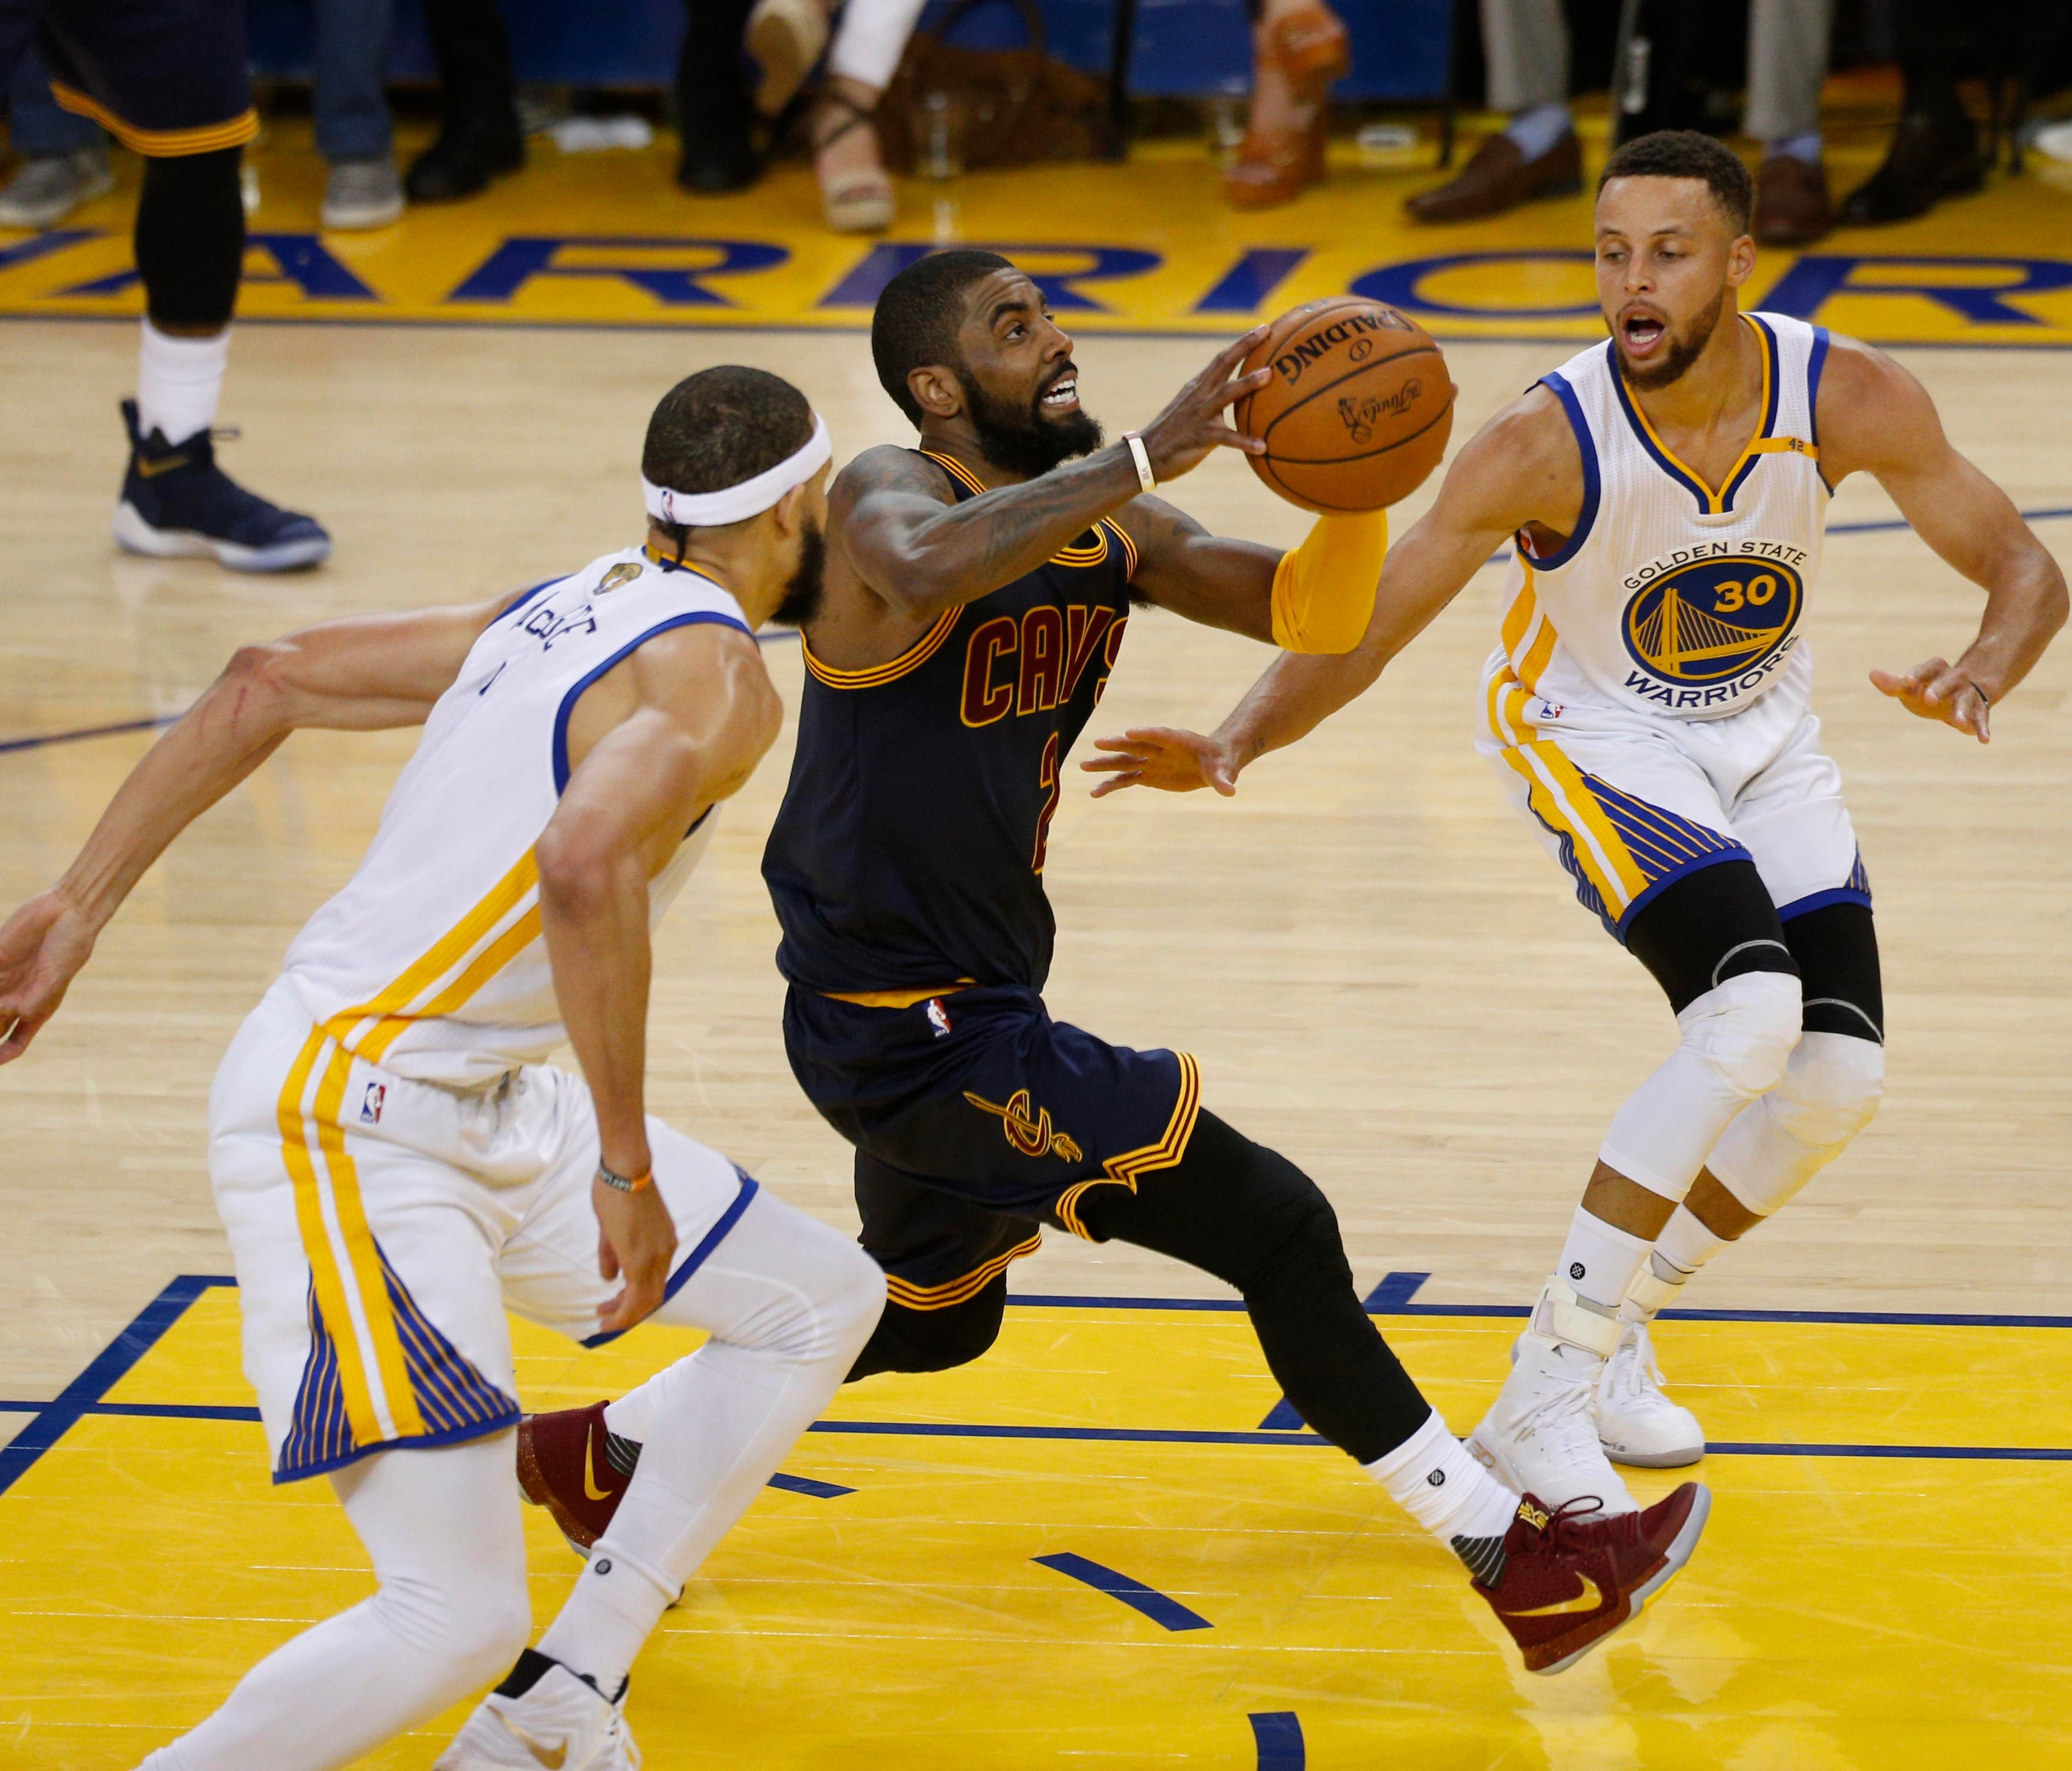 Cleveland Cavaliers guard Kyrie Irving (2) drives to the basket against Golden State Warriors guard Stephen Curry (30) and center JaVale McGee (1) in the first half of the NBA Finals at Oracle Arena.